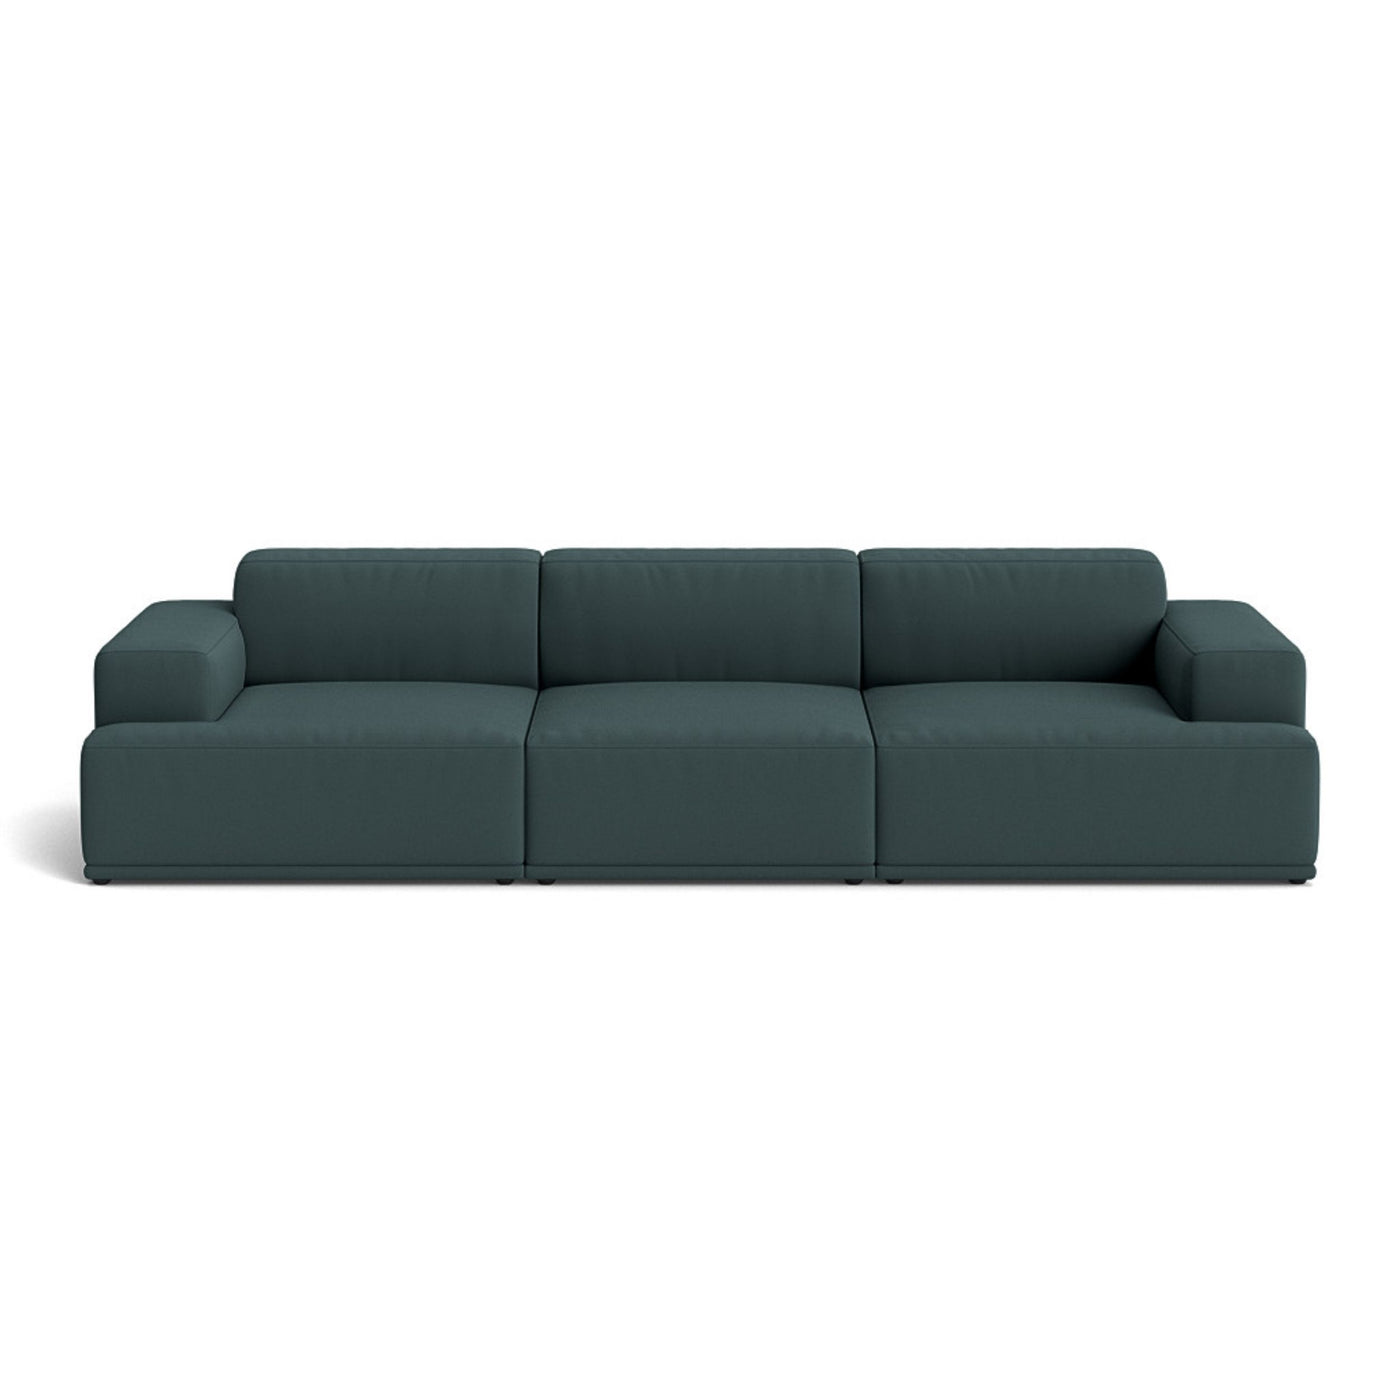 Muuto Connect Soft Modular 3 Seater Sofa, configuration 1. Made-to-order from someday designs. #colour_steelcut-180